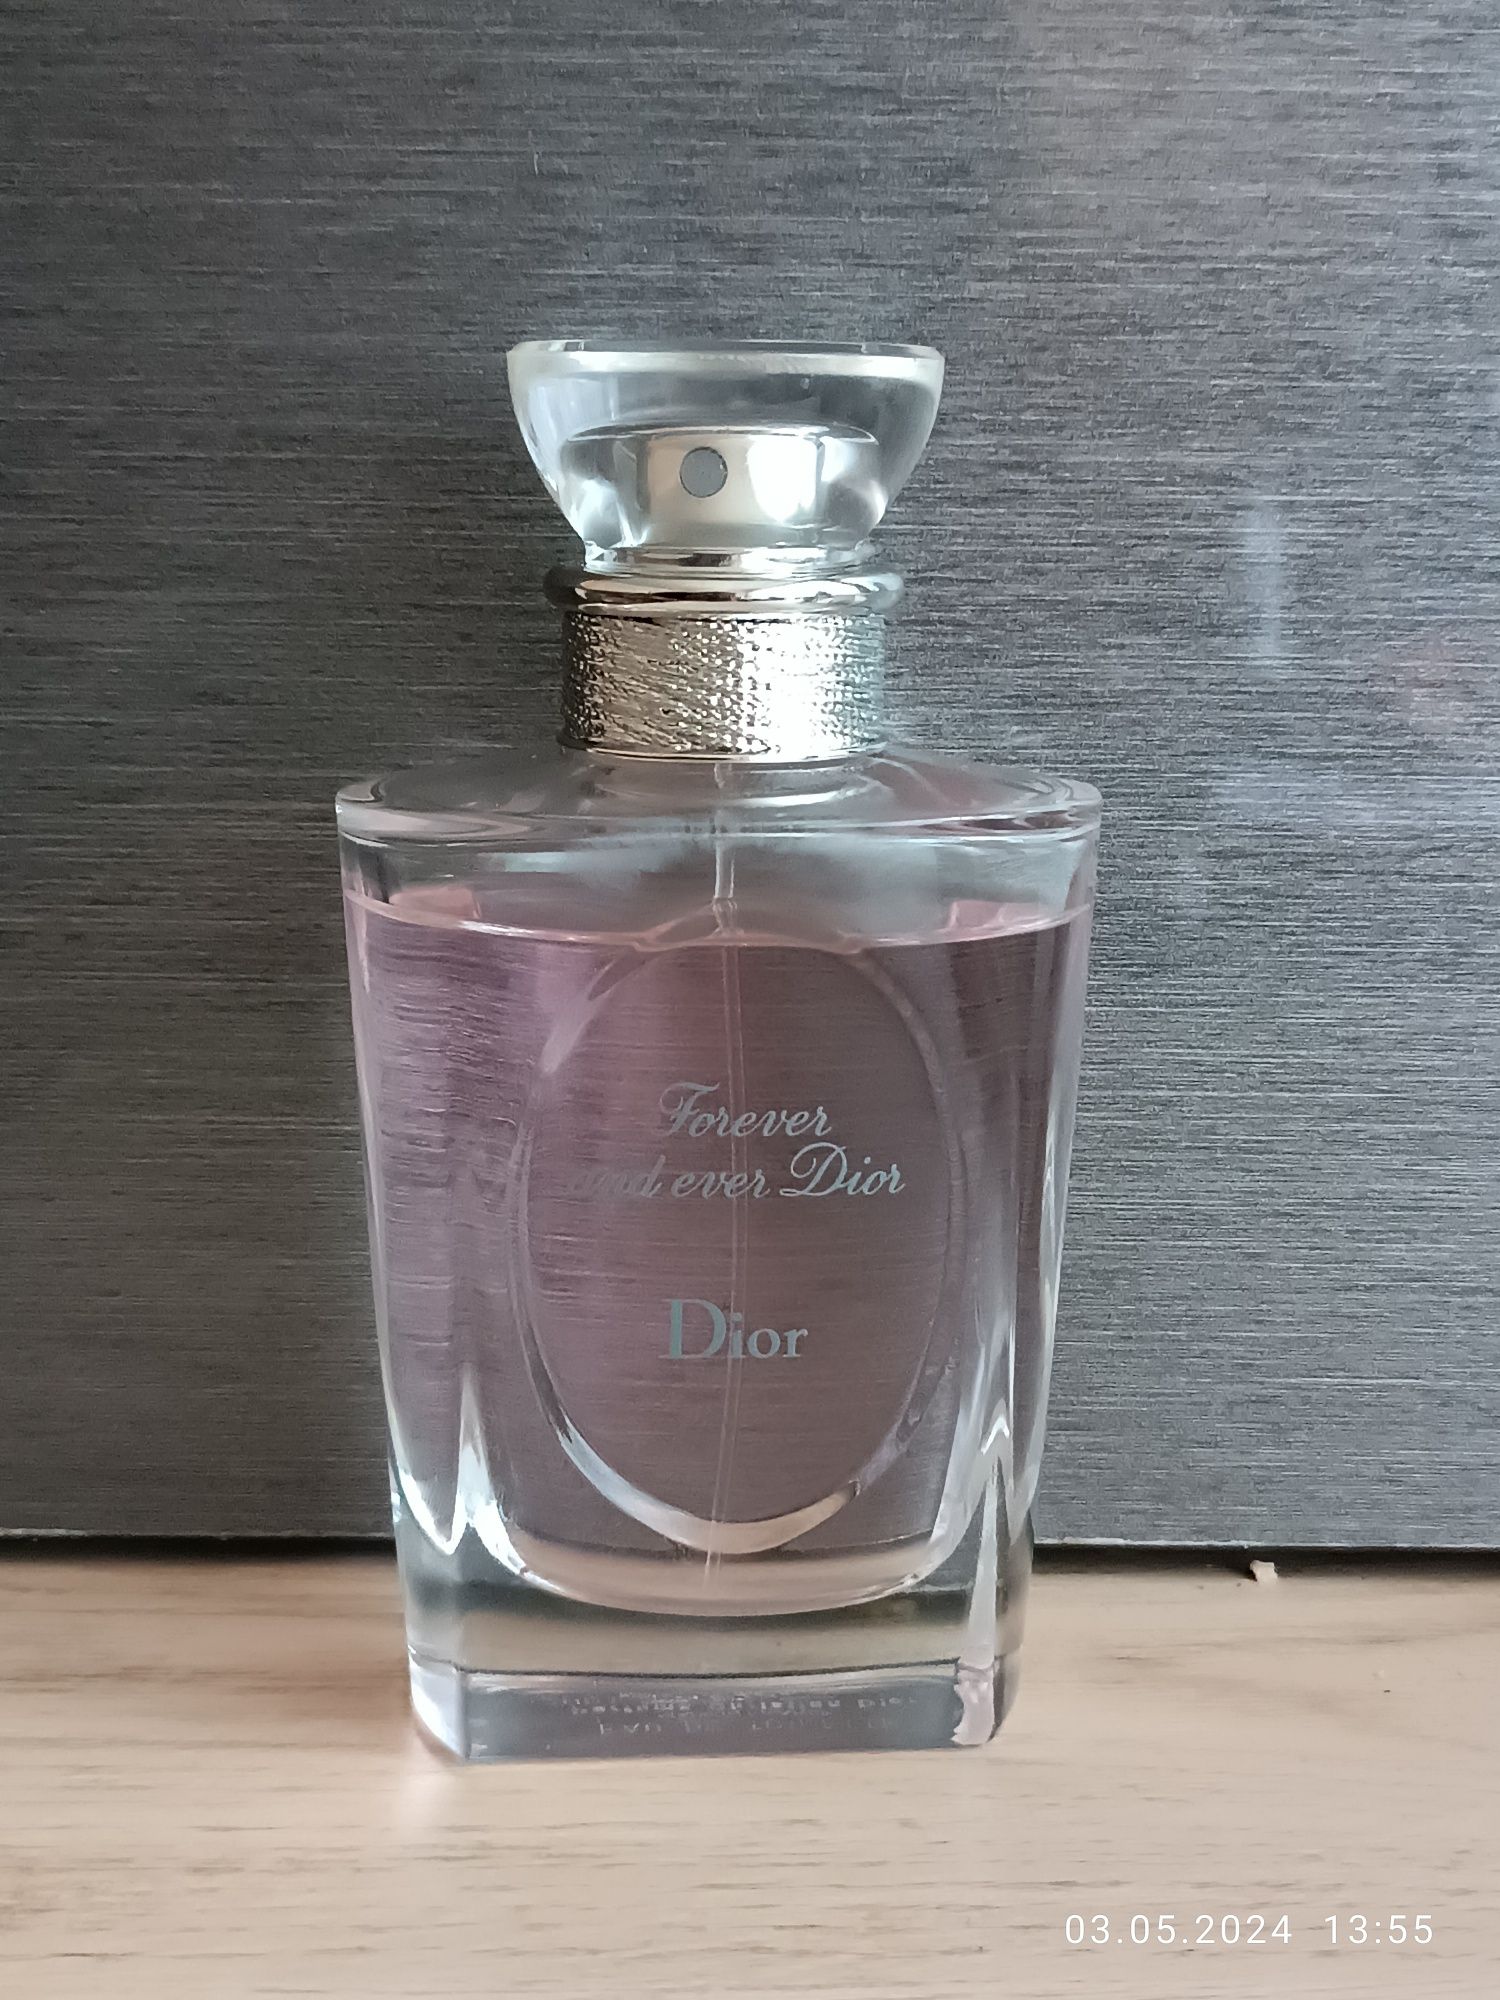 Dior Forever and ever 100 мл. духи туалетная вода